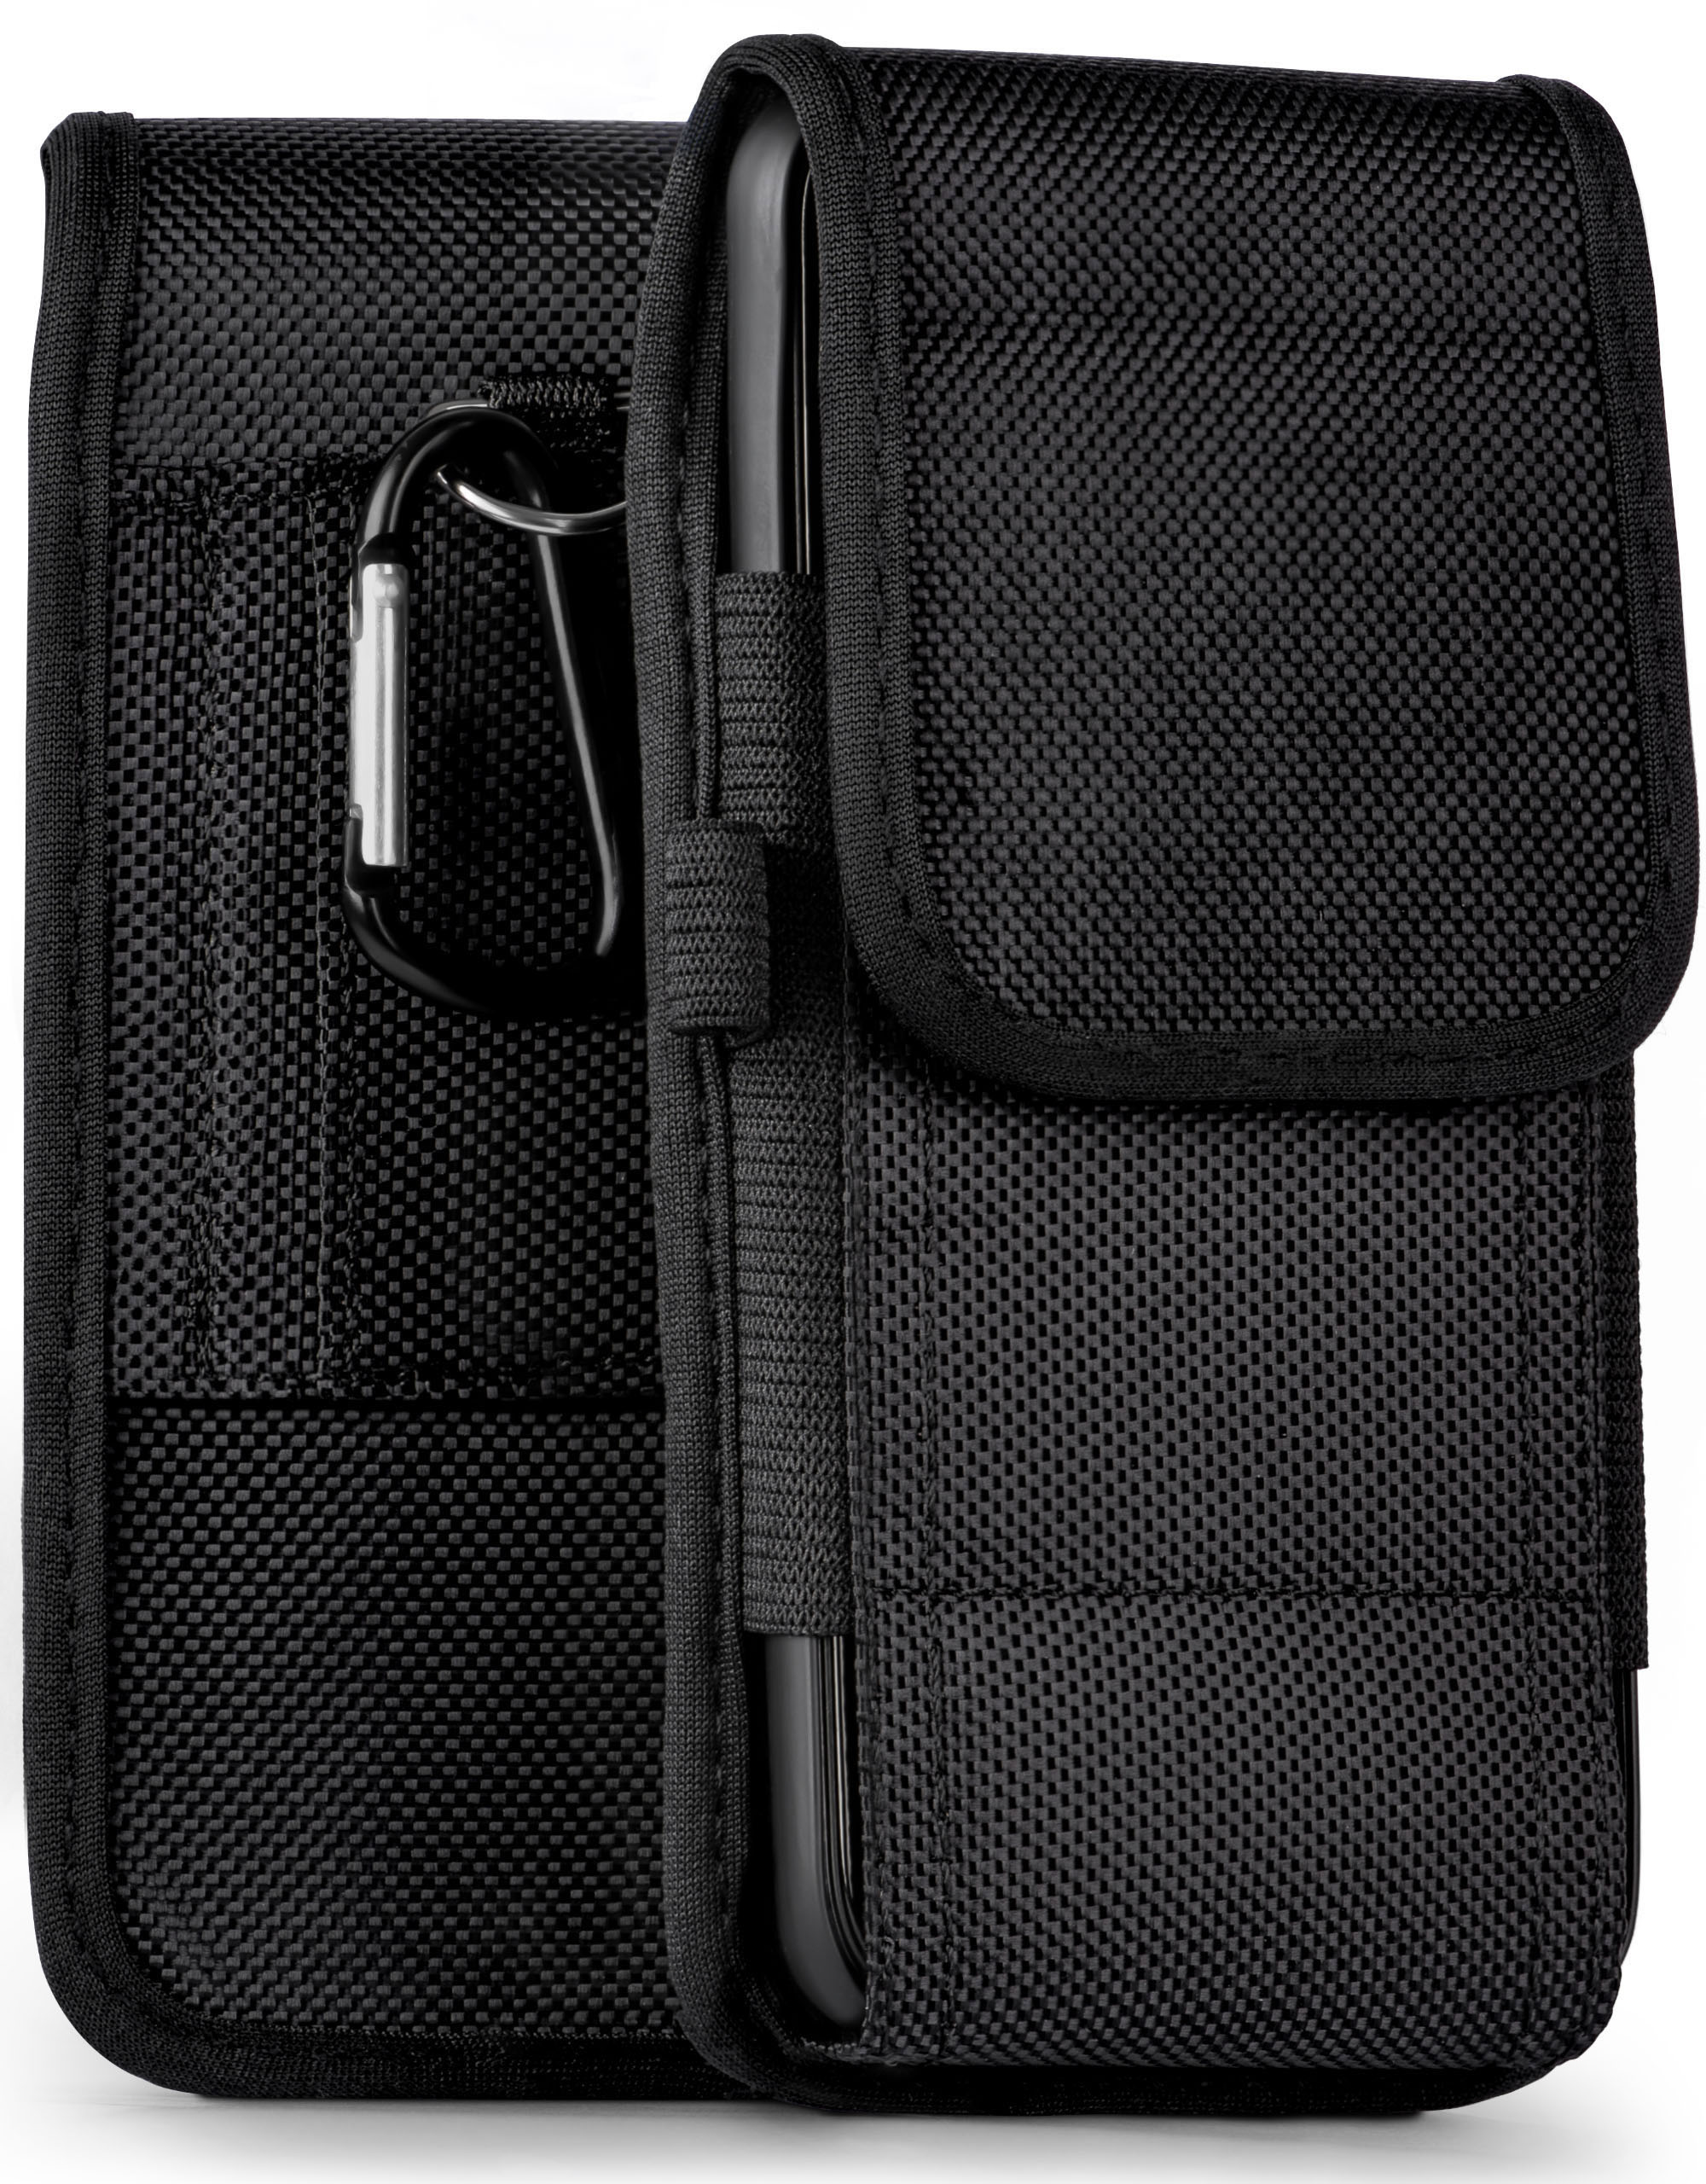 Case, Lenny Holster, Agility 2, MOEX Trail Wiko,